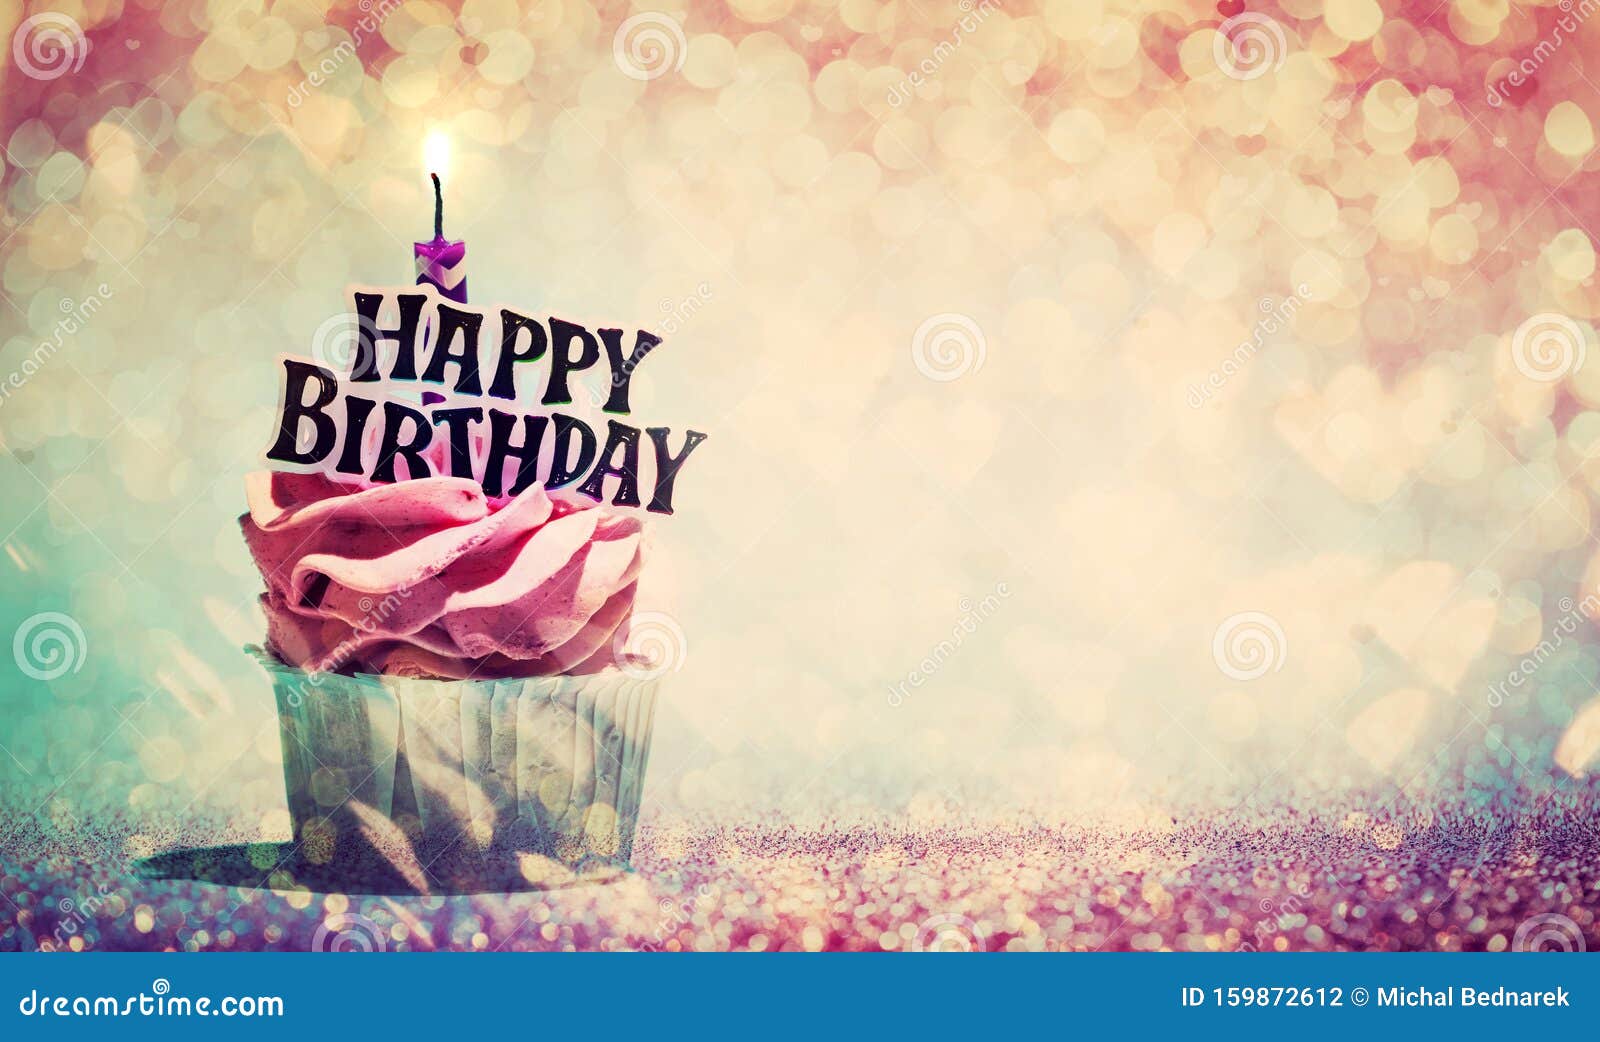 icture freeuse download png birthday greeting samples  happy fucking  birthday gary PNG image with transparent background  TOPpng